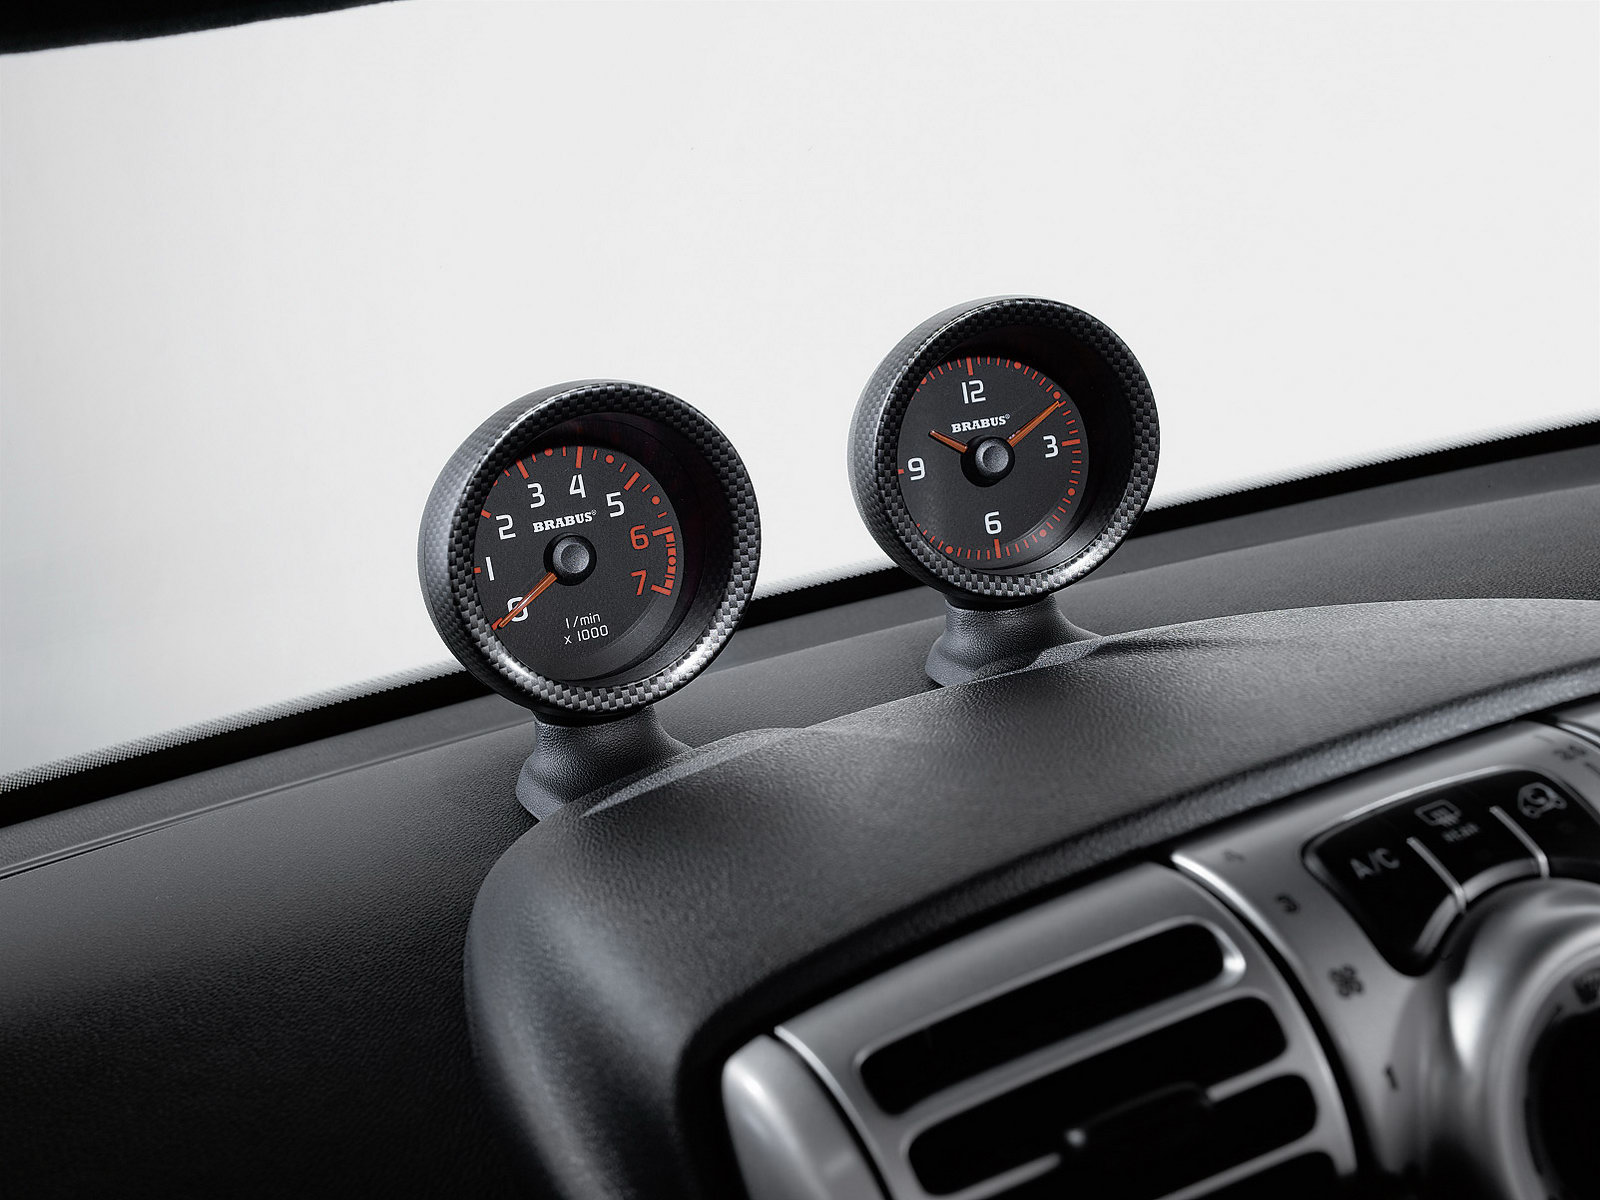 Smart-Fortwo-Accessories-8